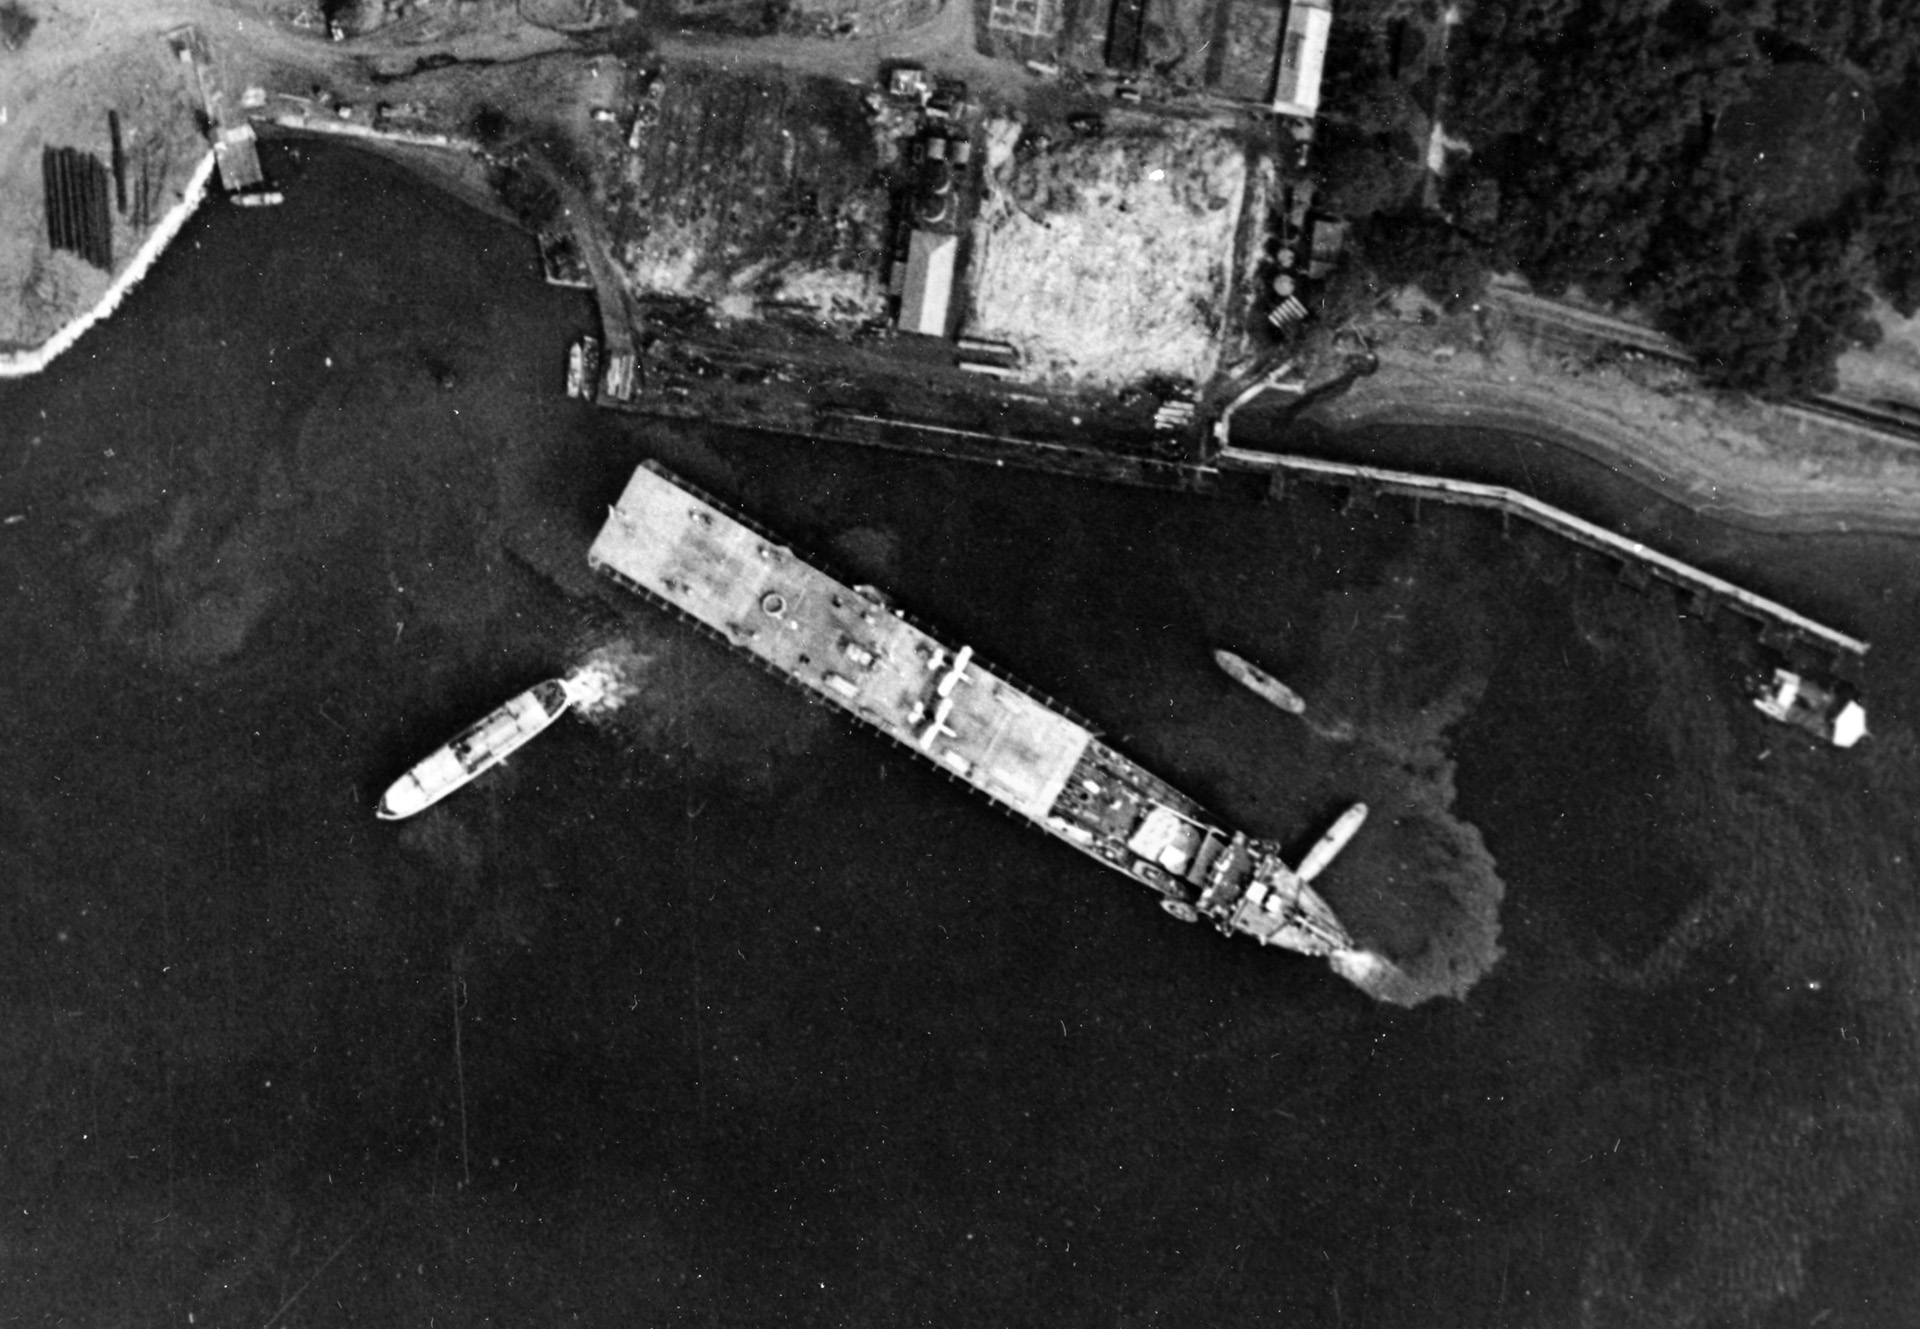 Converted to her seaplane tender configuration and designated AV-3, USS Langley is shown off Sangley Point, Philippine Islands, in October 1941, just weeks before the Japanese attack on Pearl Harbor and U.S. entry into World War II. Note that the forward section of the flight deck has been removed.